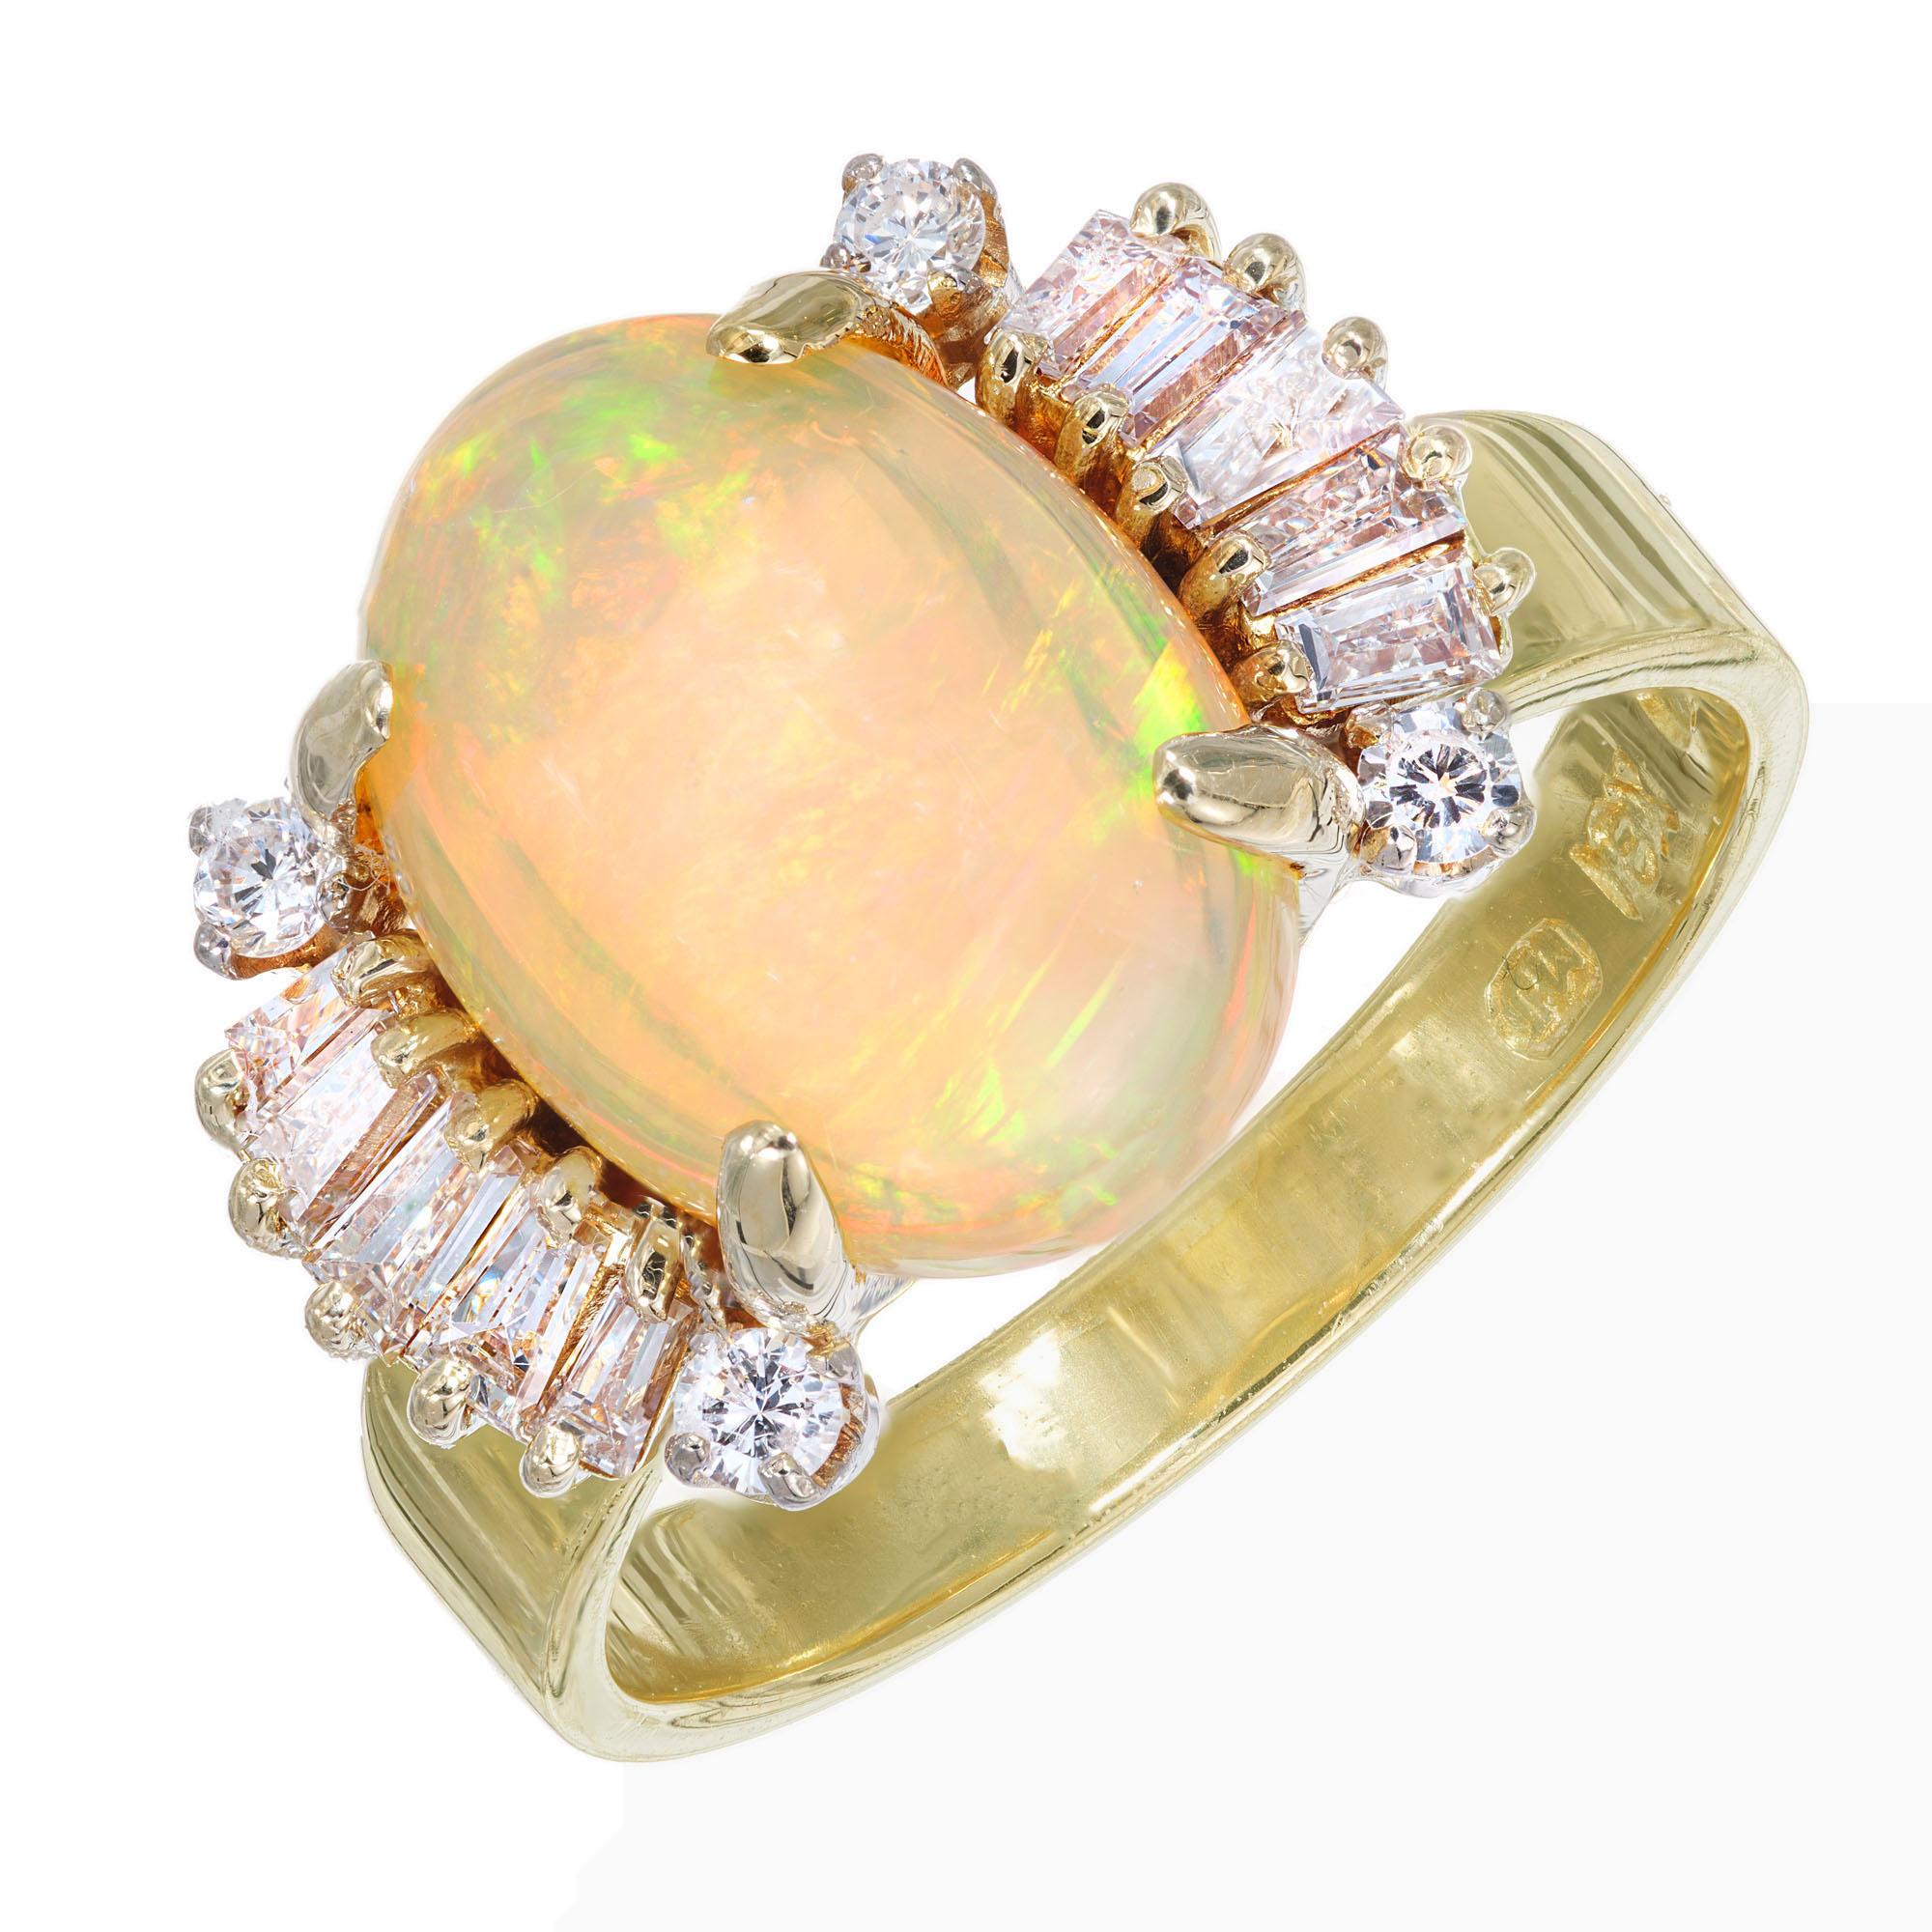 1960's Oval opal and diamond ring. 3.20 carat oval cabochon center opal with 4 round and 10 tapered baguette cut diamonds in a 18k yellow gold setting. The opal consists of  Red and orange flashes with green and blue overtones. Handmade wire setting